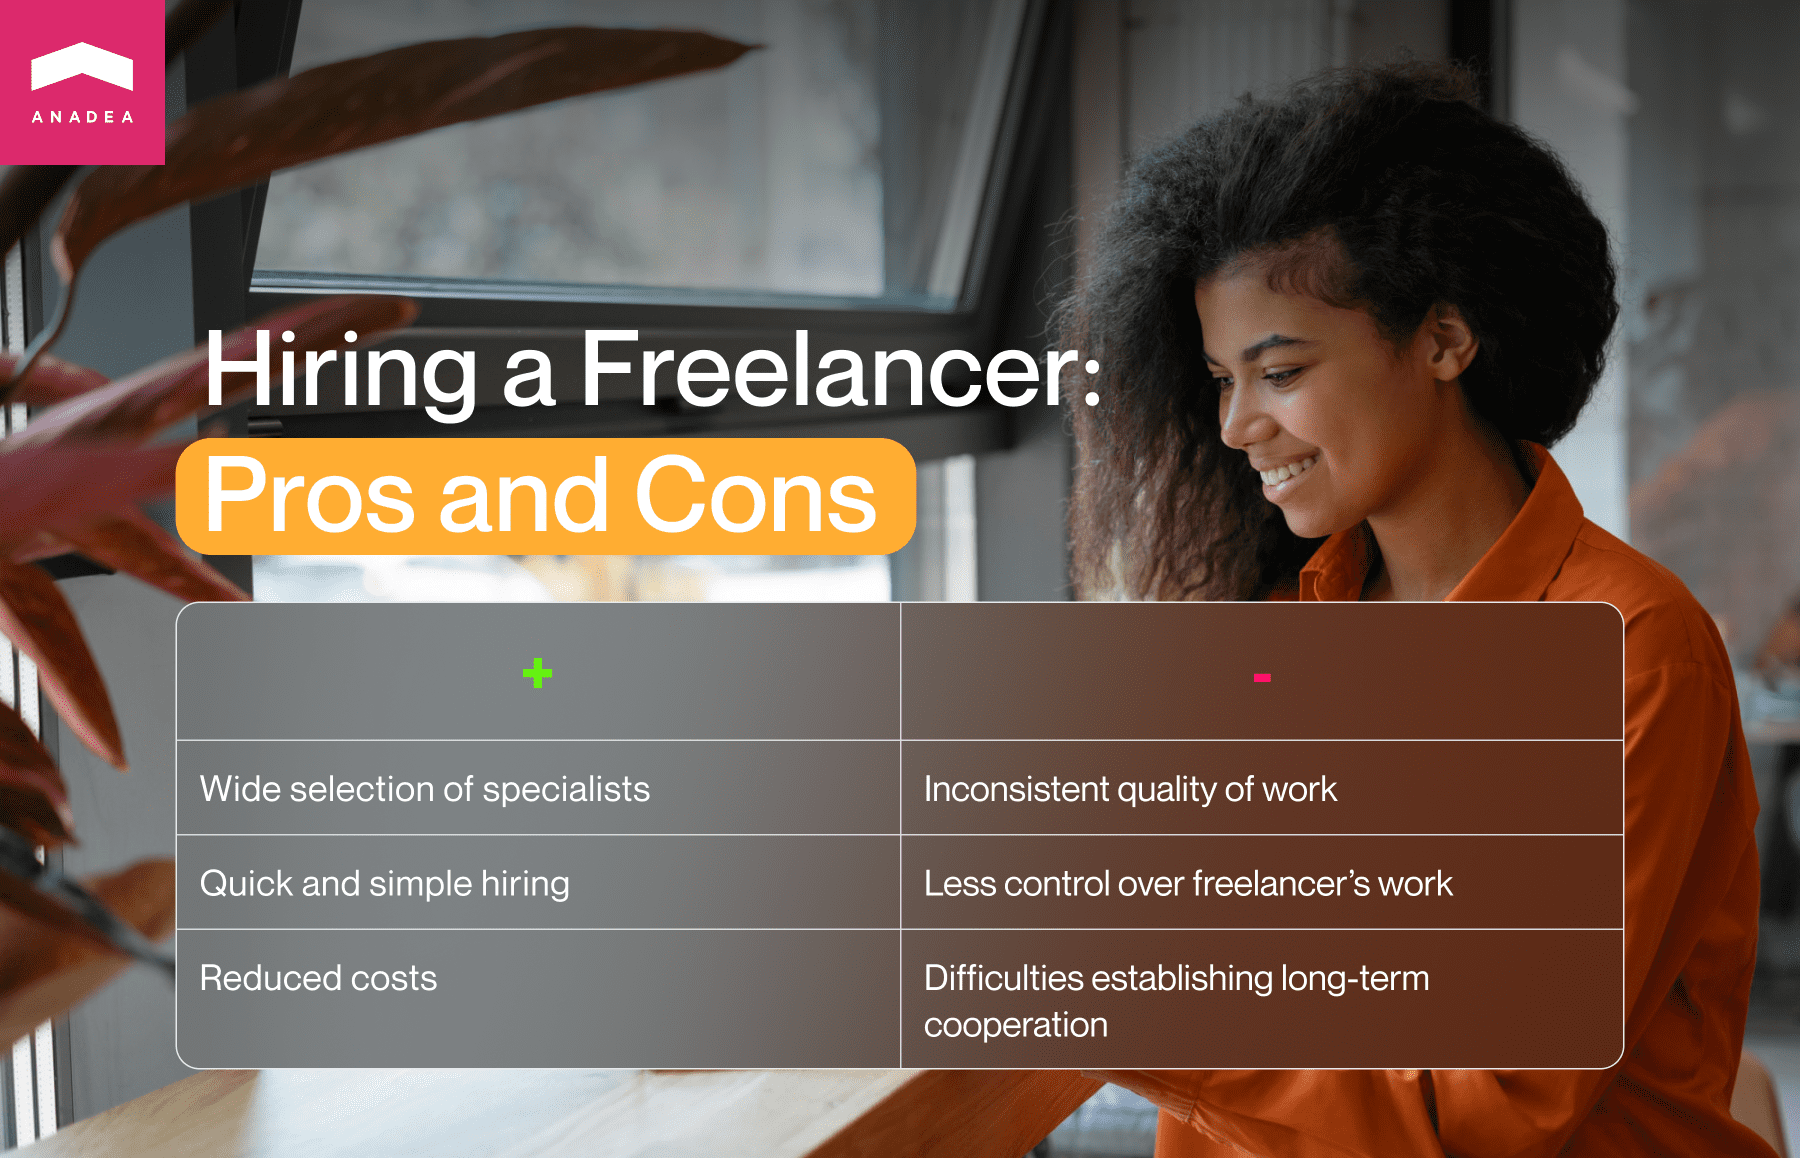 Pros and Cons of hiring a freelancer for a software development project